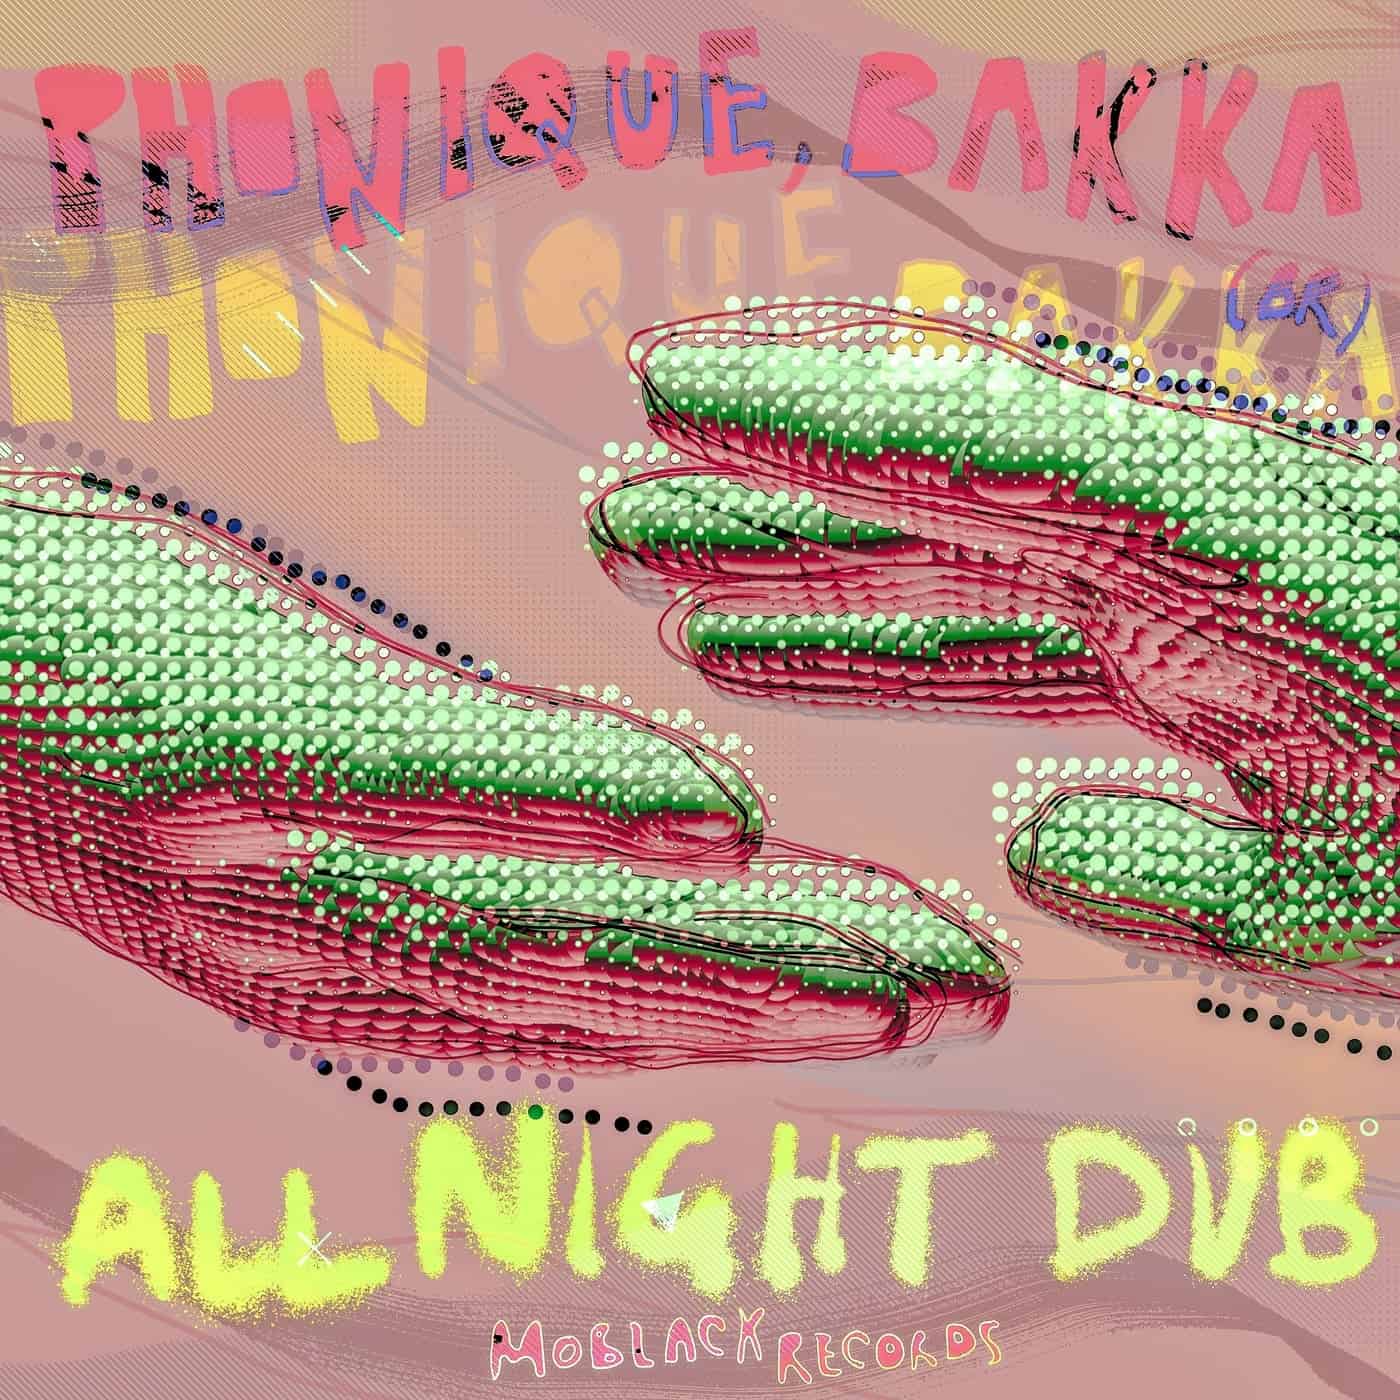 image cover: Phonique, Bakka (BR) - All Night Dub / MBR486